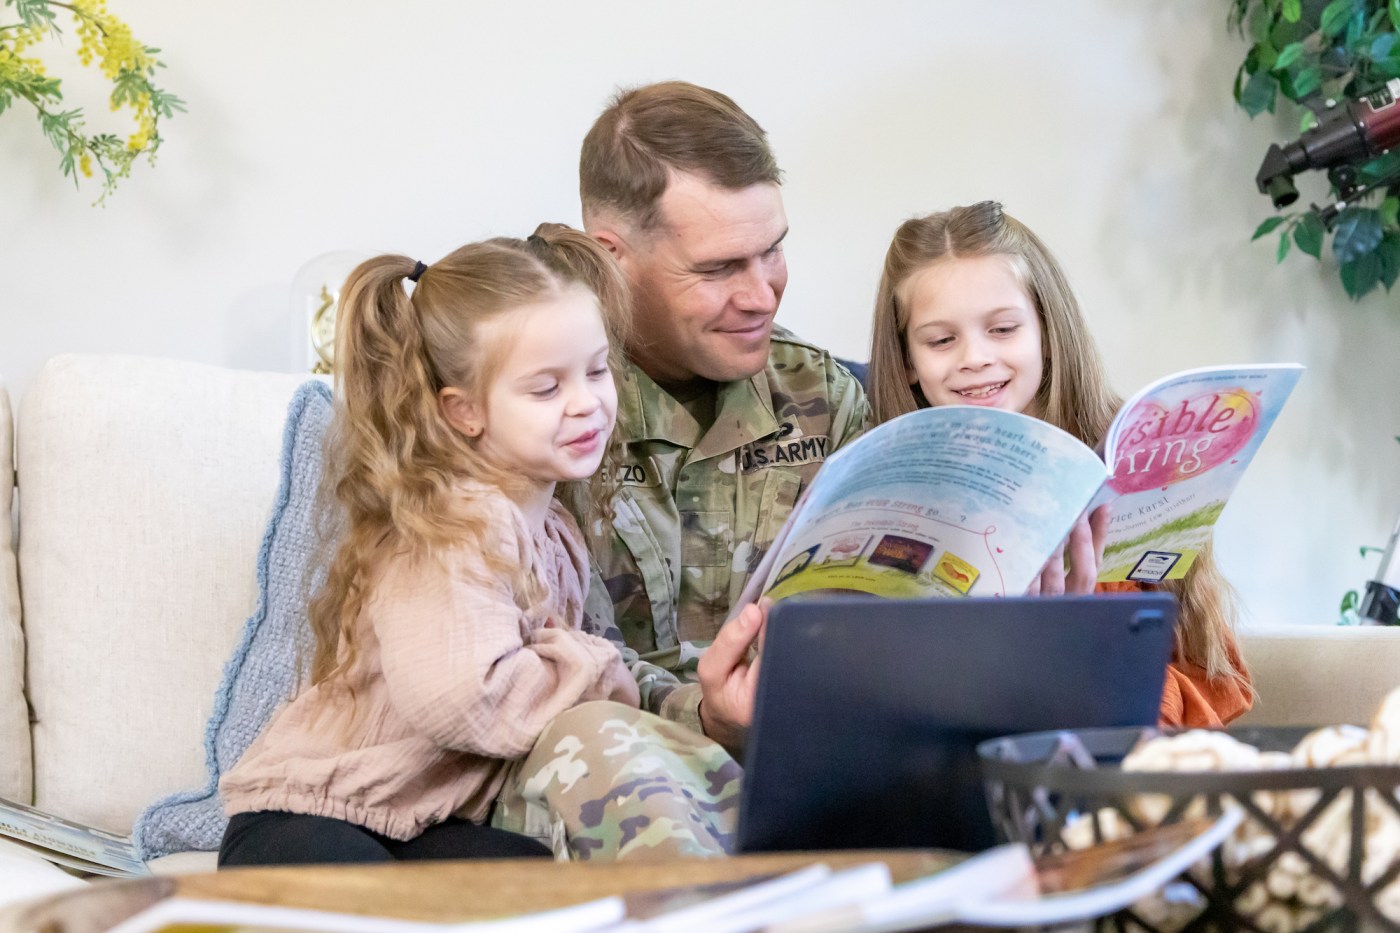 man in military uniform and two children reading book together as a family